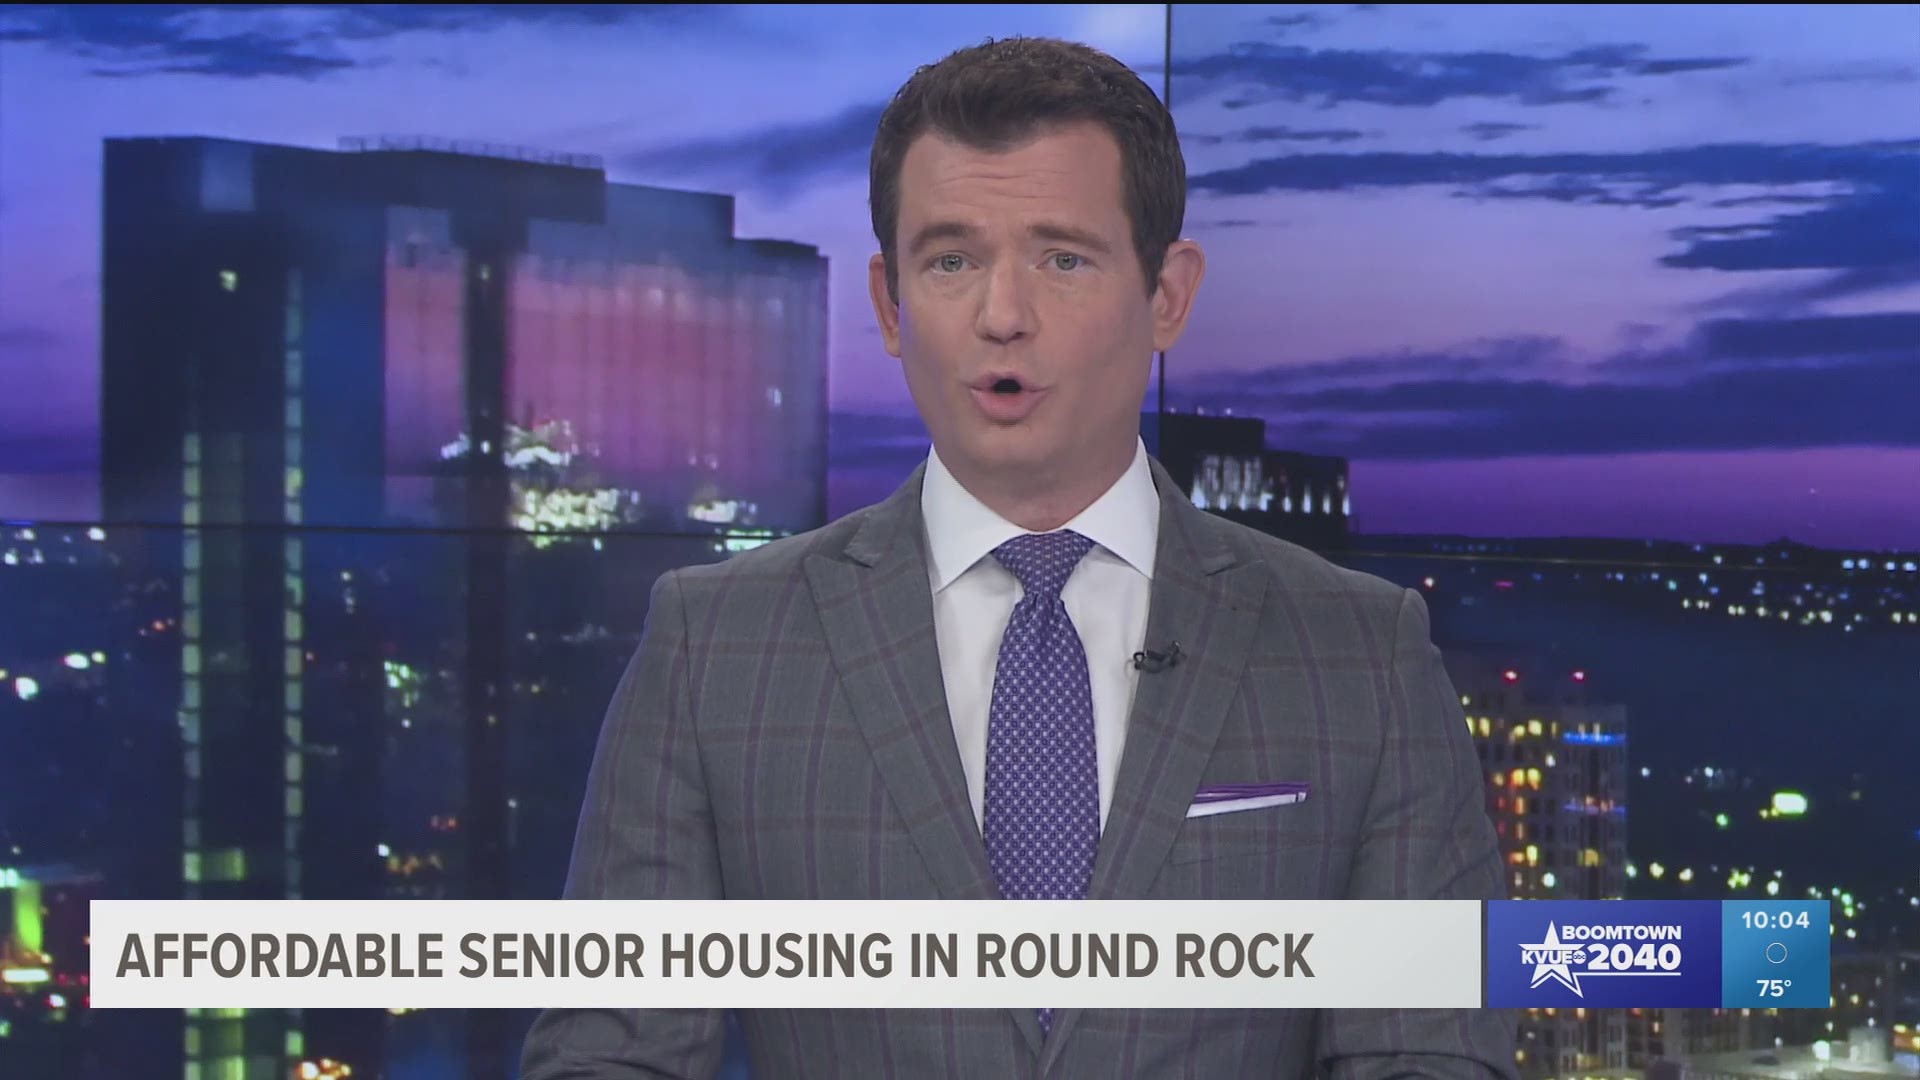 Round Rock is trying to fill the growing niche for older Texans – not assisted living, but for people who are widowed, early into retirement or just don't want to maintain a house anymore.